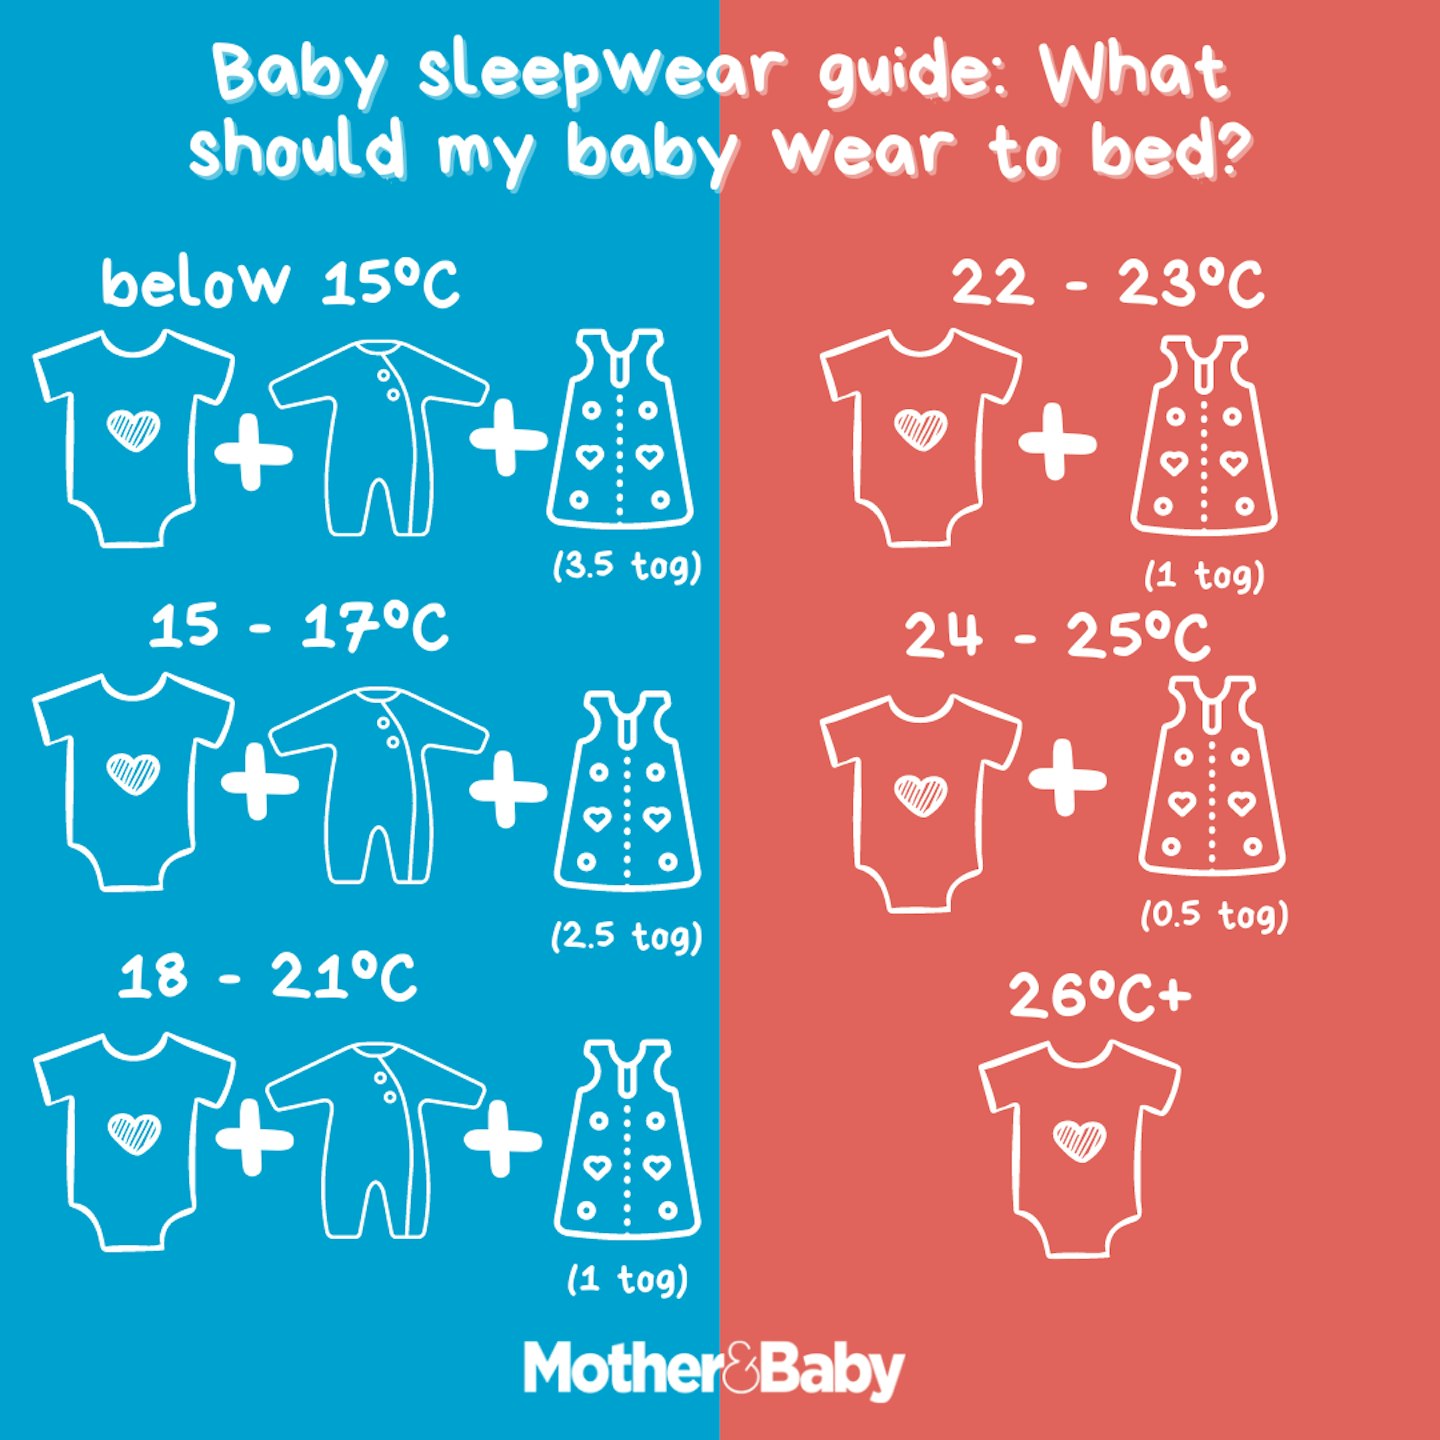 What should my baby wear to bed